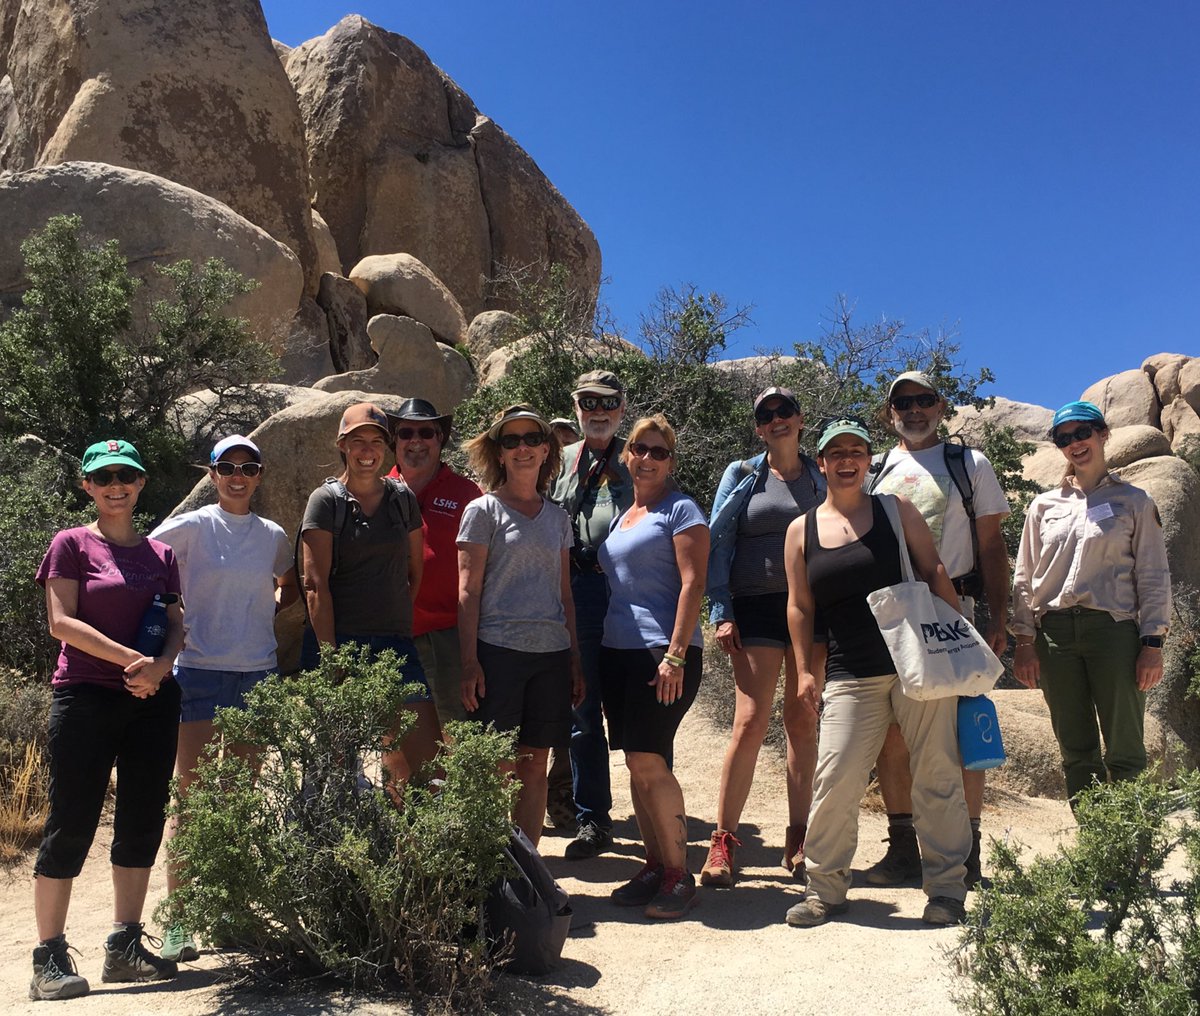 We had the best participants at this weekend’s session: STEAM Creativity Inspired by Joshua Tree National Park! Thank you to the JTNP Association the the amazingly generous JTNP rangers who collaborated with us #STEAM #creativity #biomimicry #NGSS #artsineducation #enviroliteracy